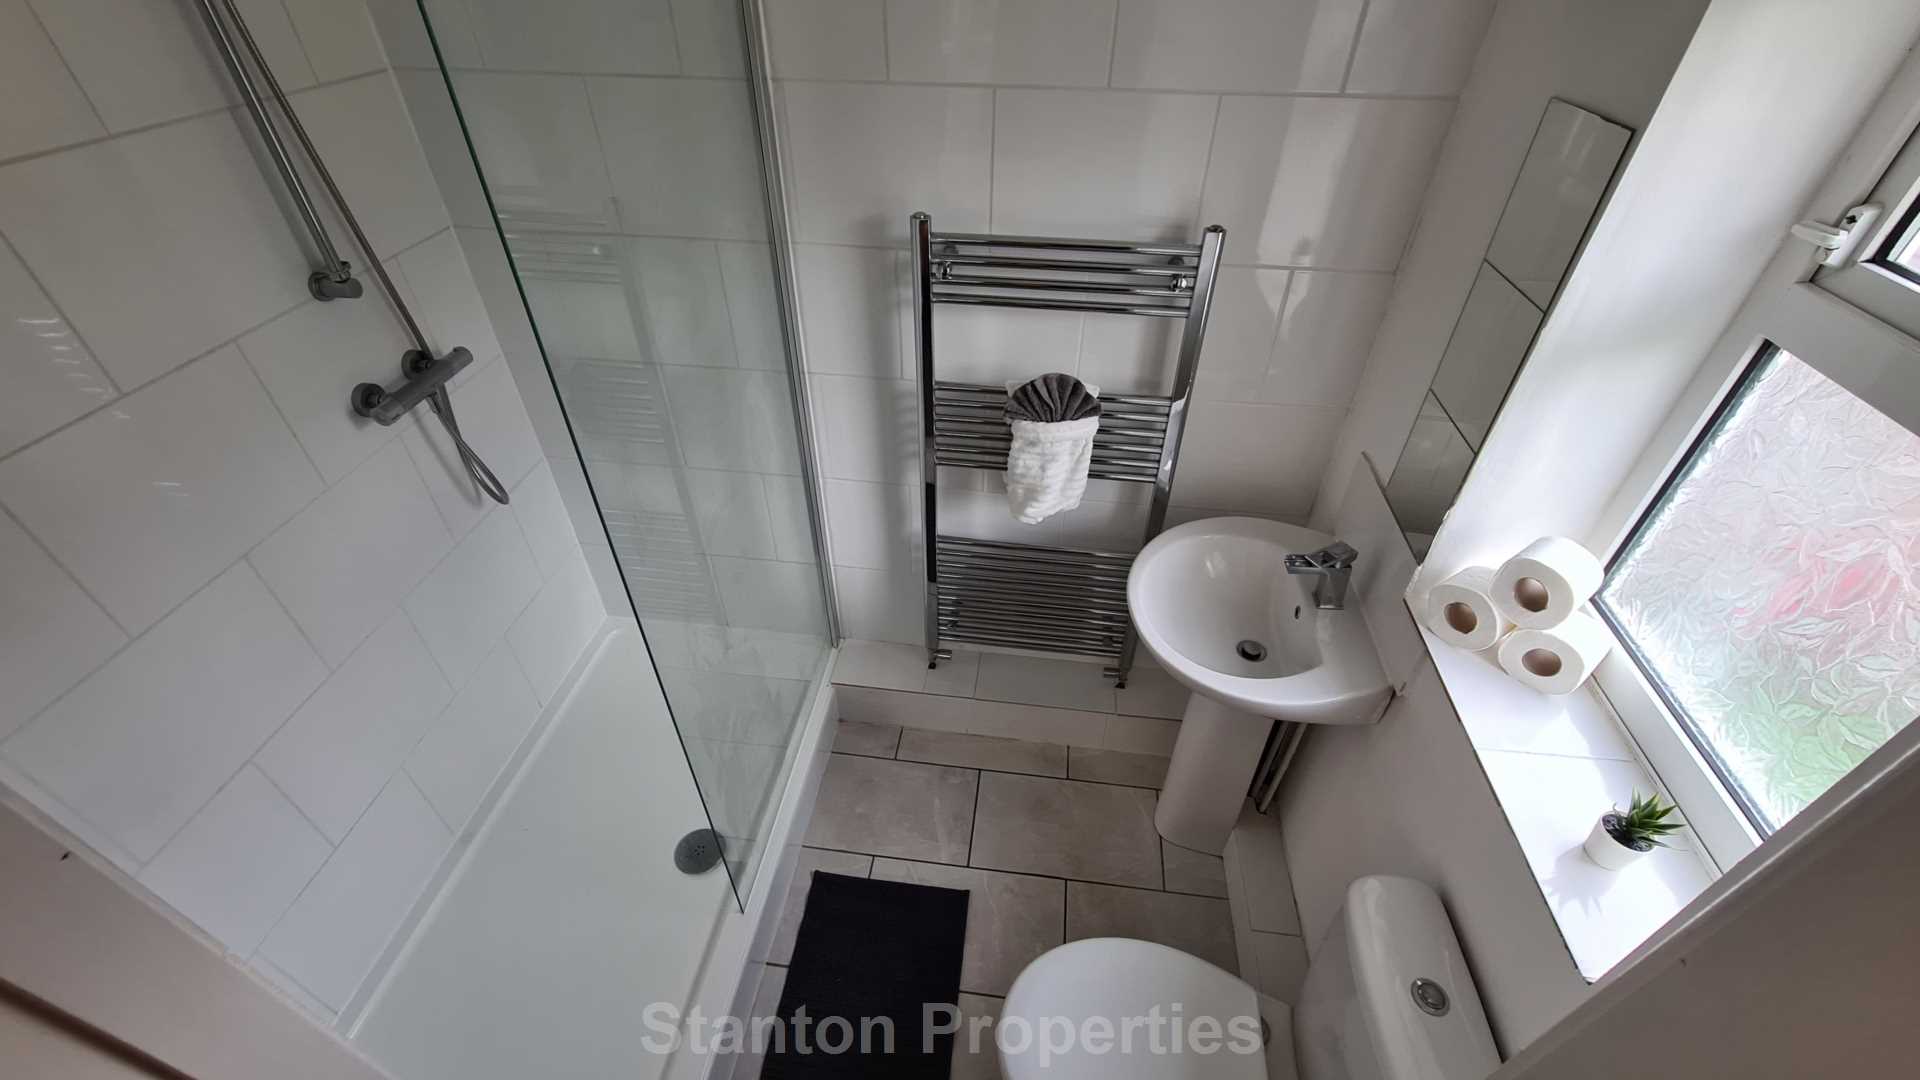 £155 pppw, See Video Tour, Granville Road, Fallowfield, Image 7